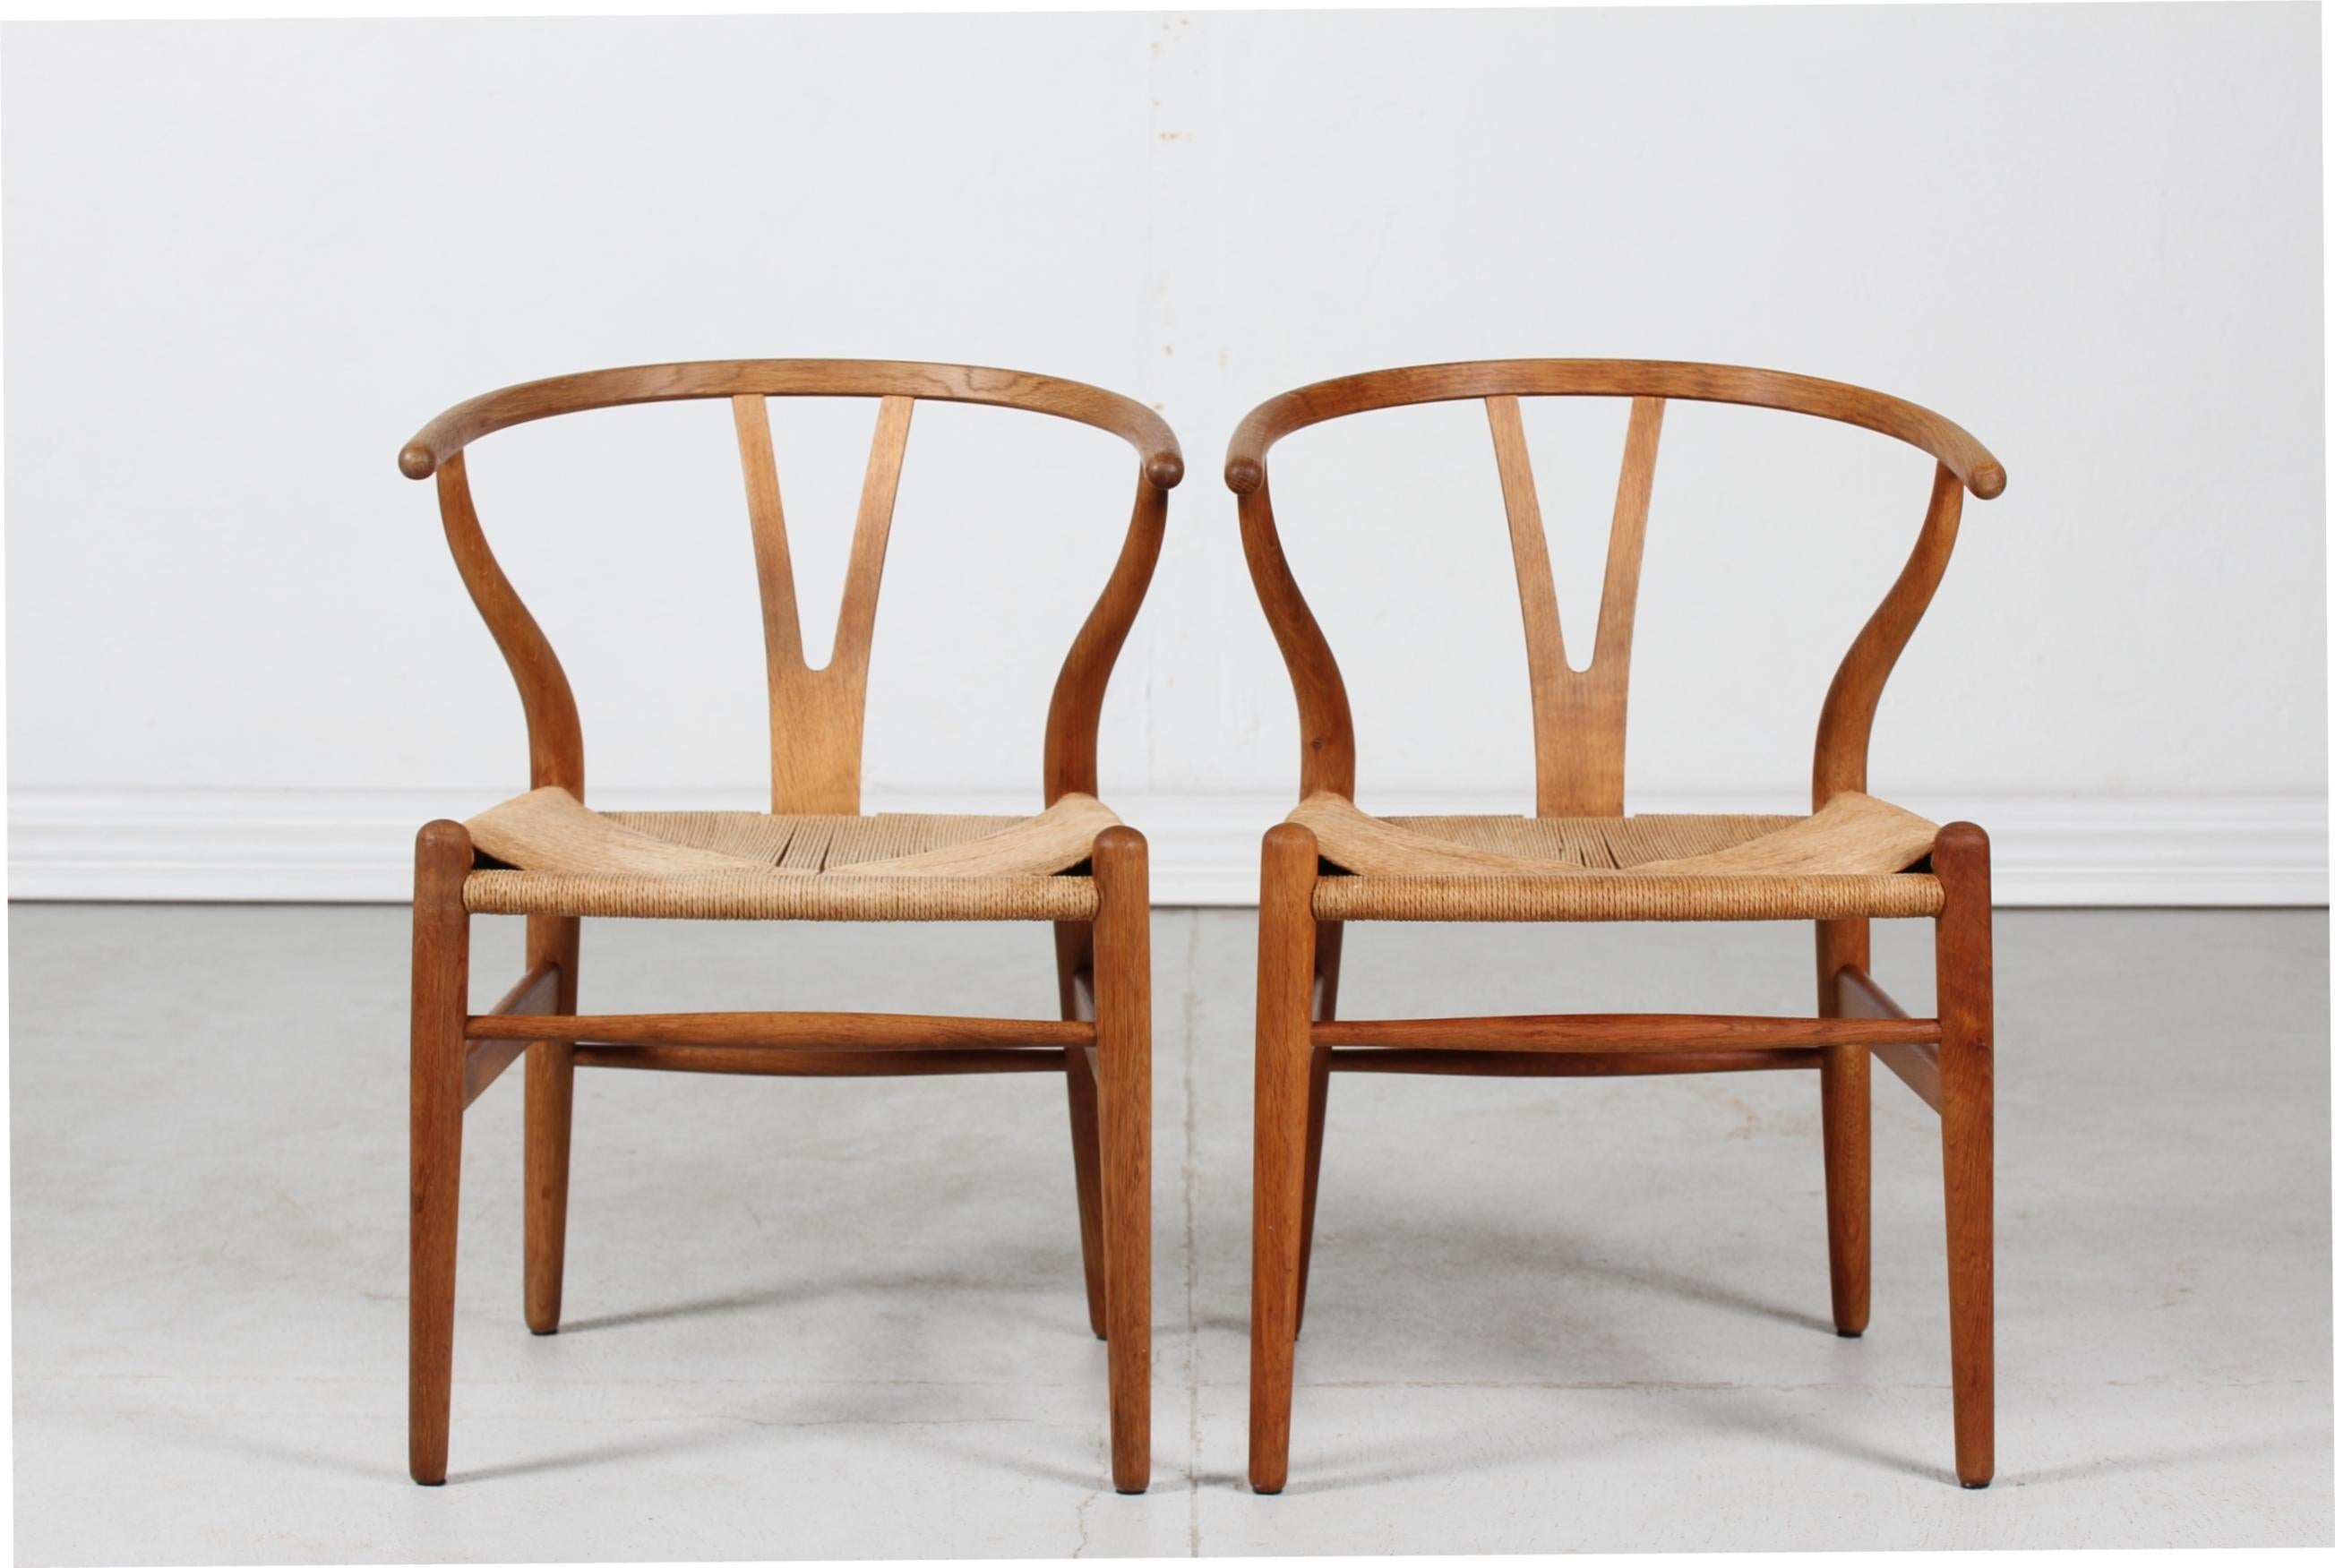 A pair of early Hans J. Wegner (1914-2007) wishbone chairs with burn mark. 
Model no. CH 24 manufactured by Carl Hansen & Son, Denmark.
The wishbone chairs has been in production since 1950.

These chairs purchased by previous owner's parents in